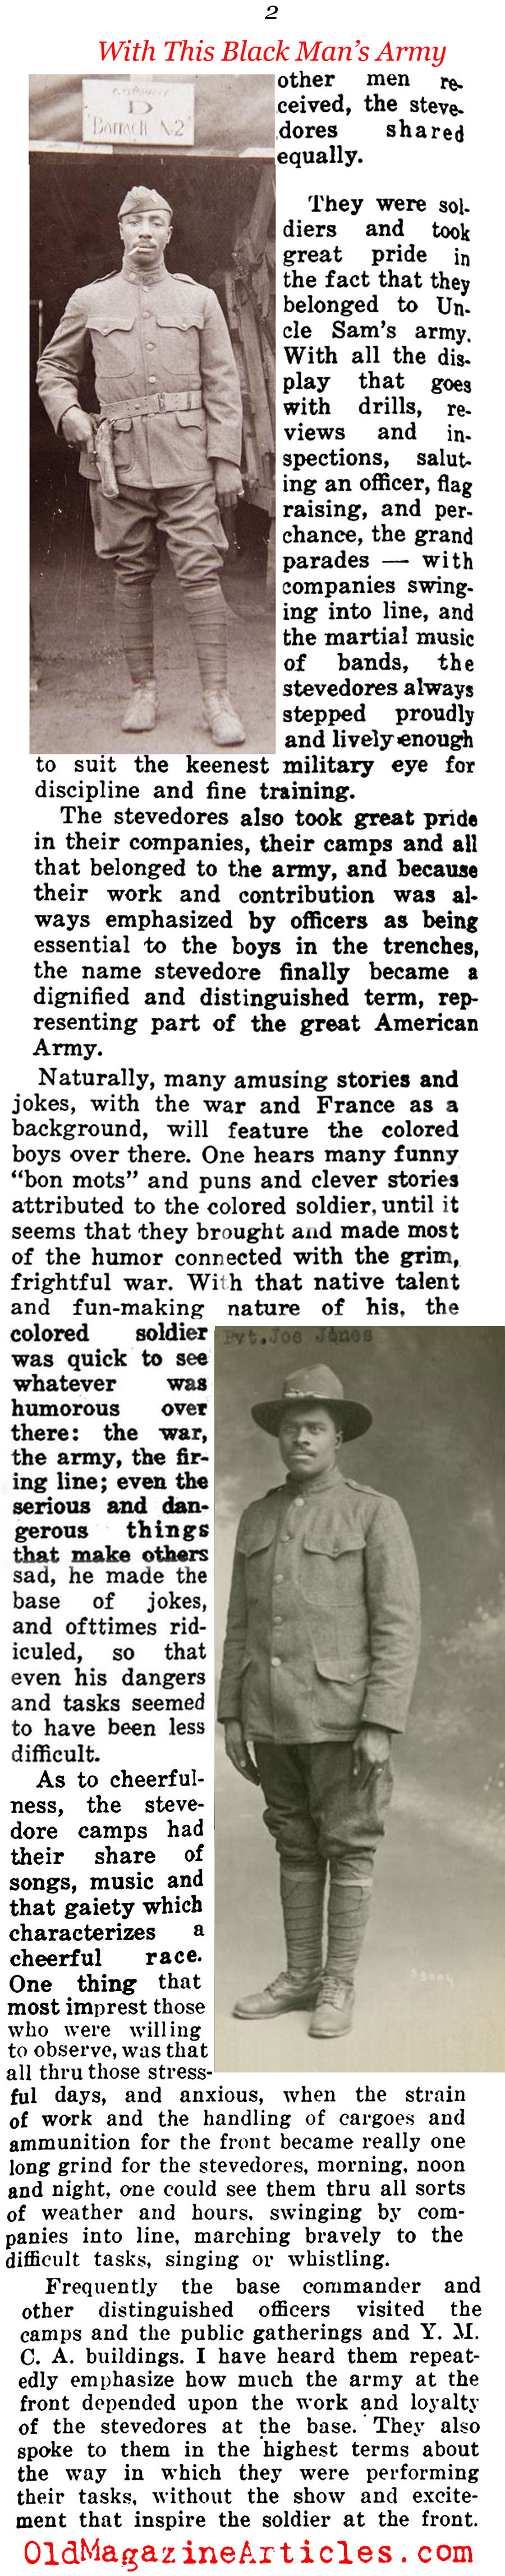 African-American Stevedores in the U.S. Army (The Independent, 1919)